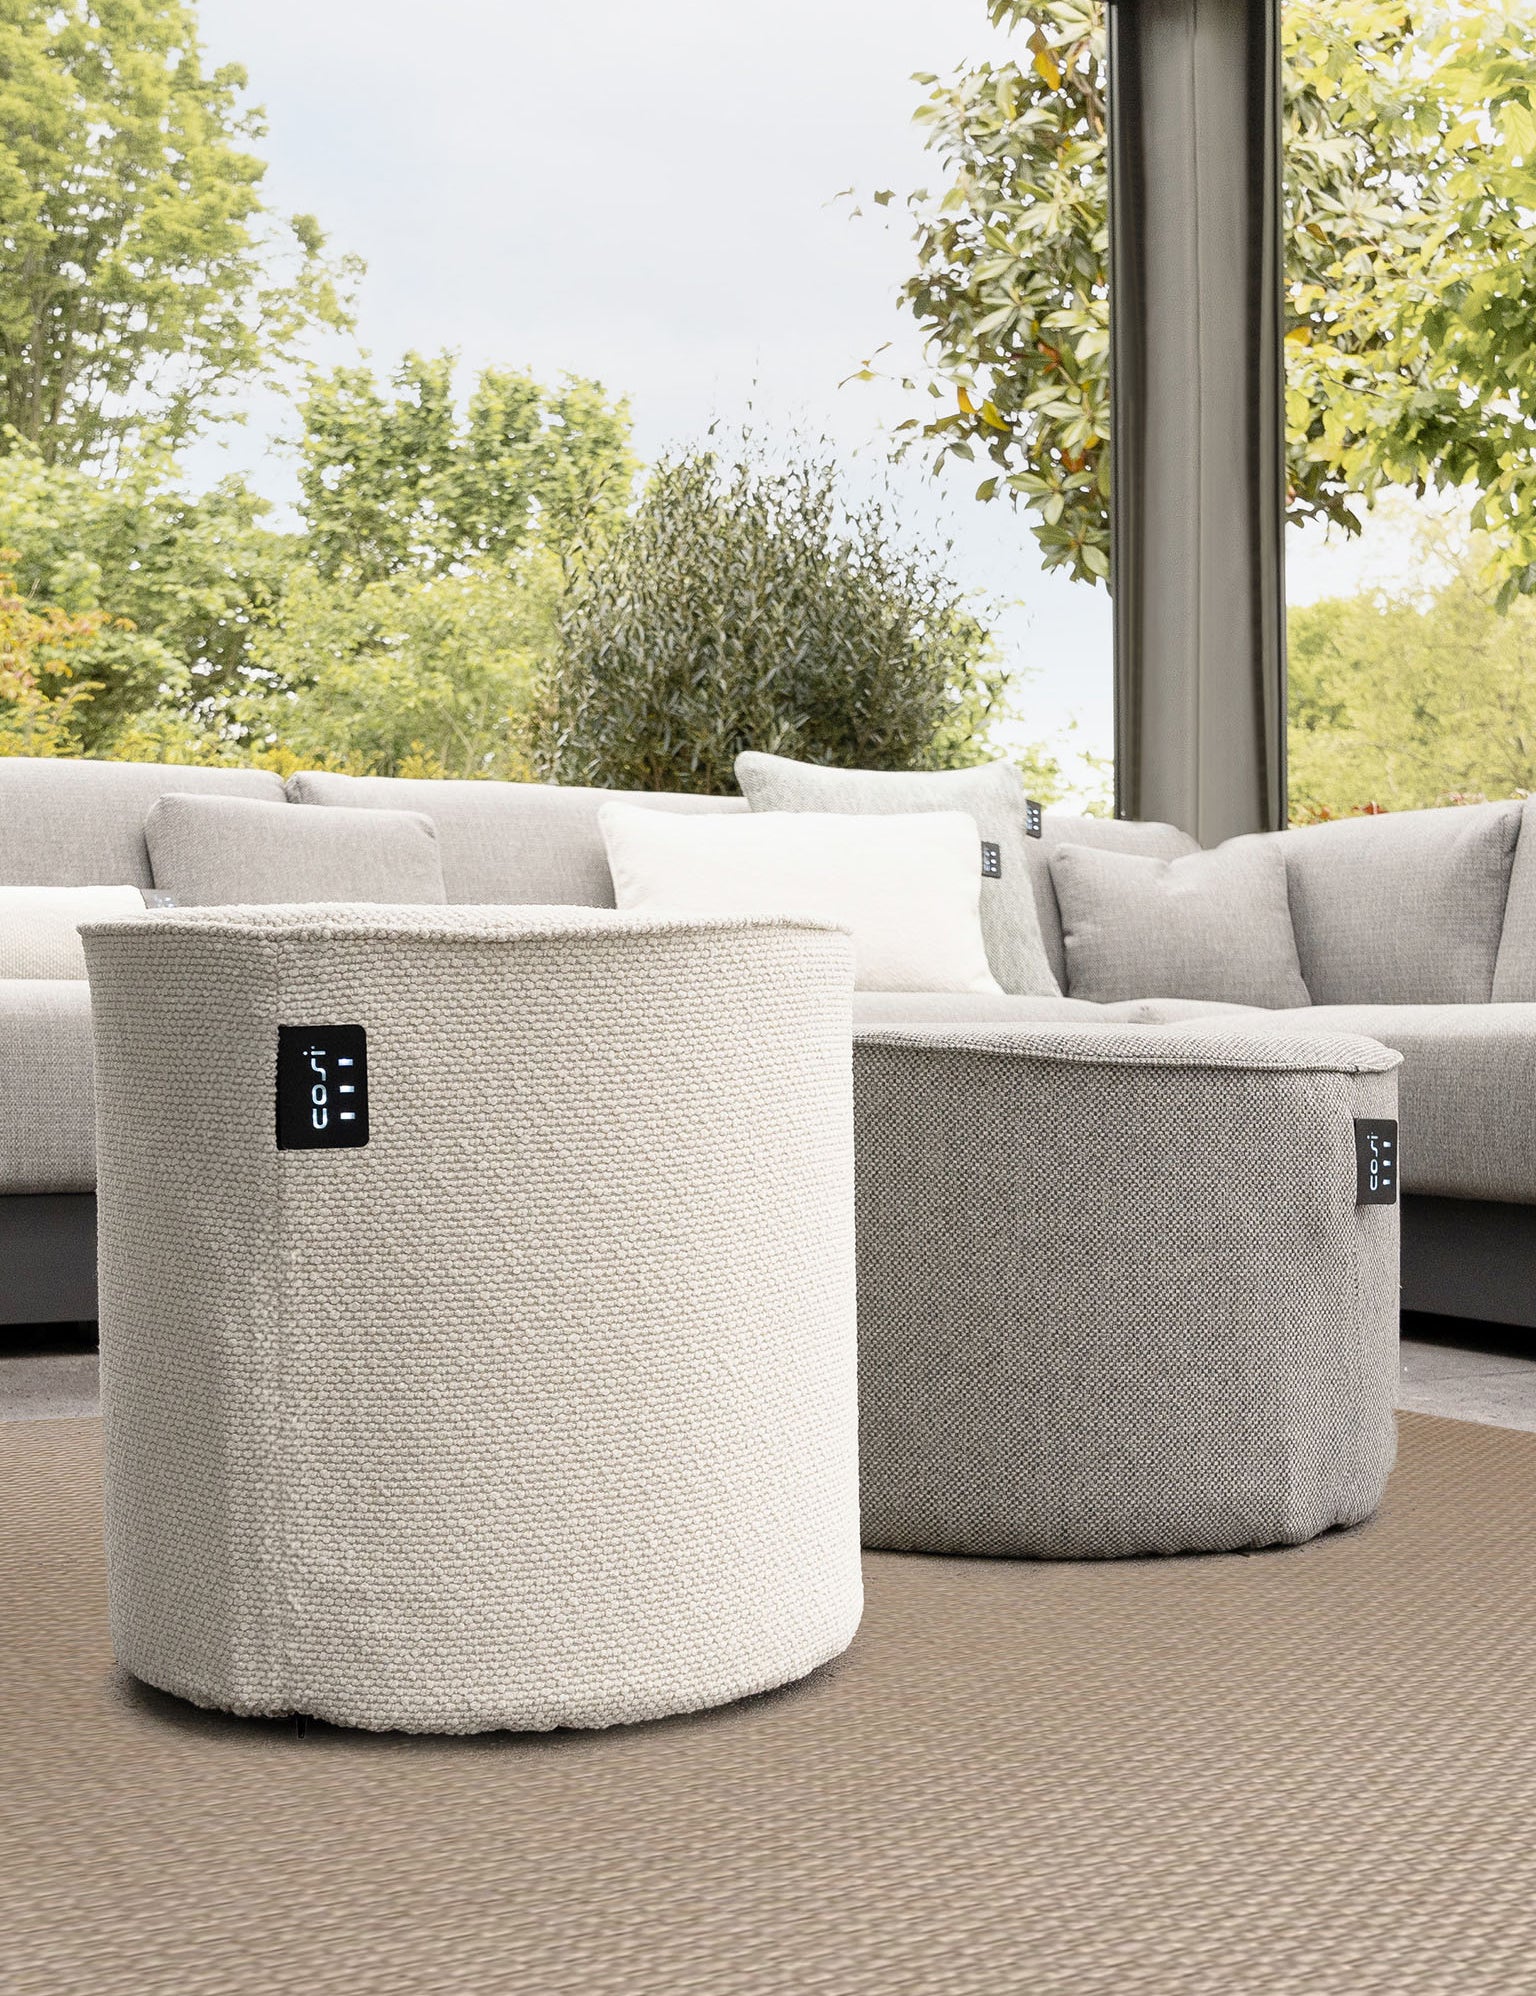 Outdoor Tall Large Pouf 45cm x 45cm